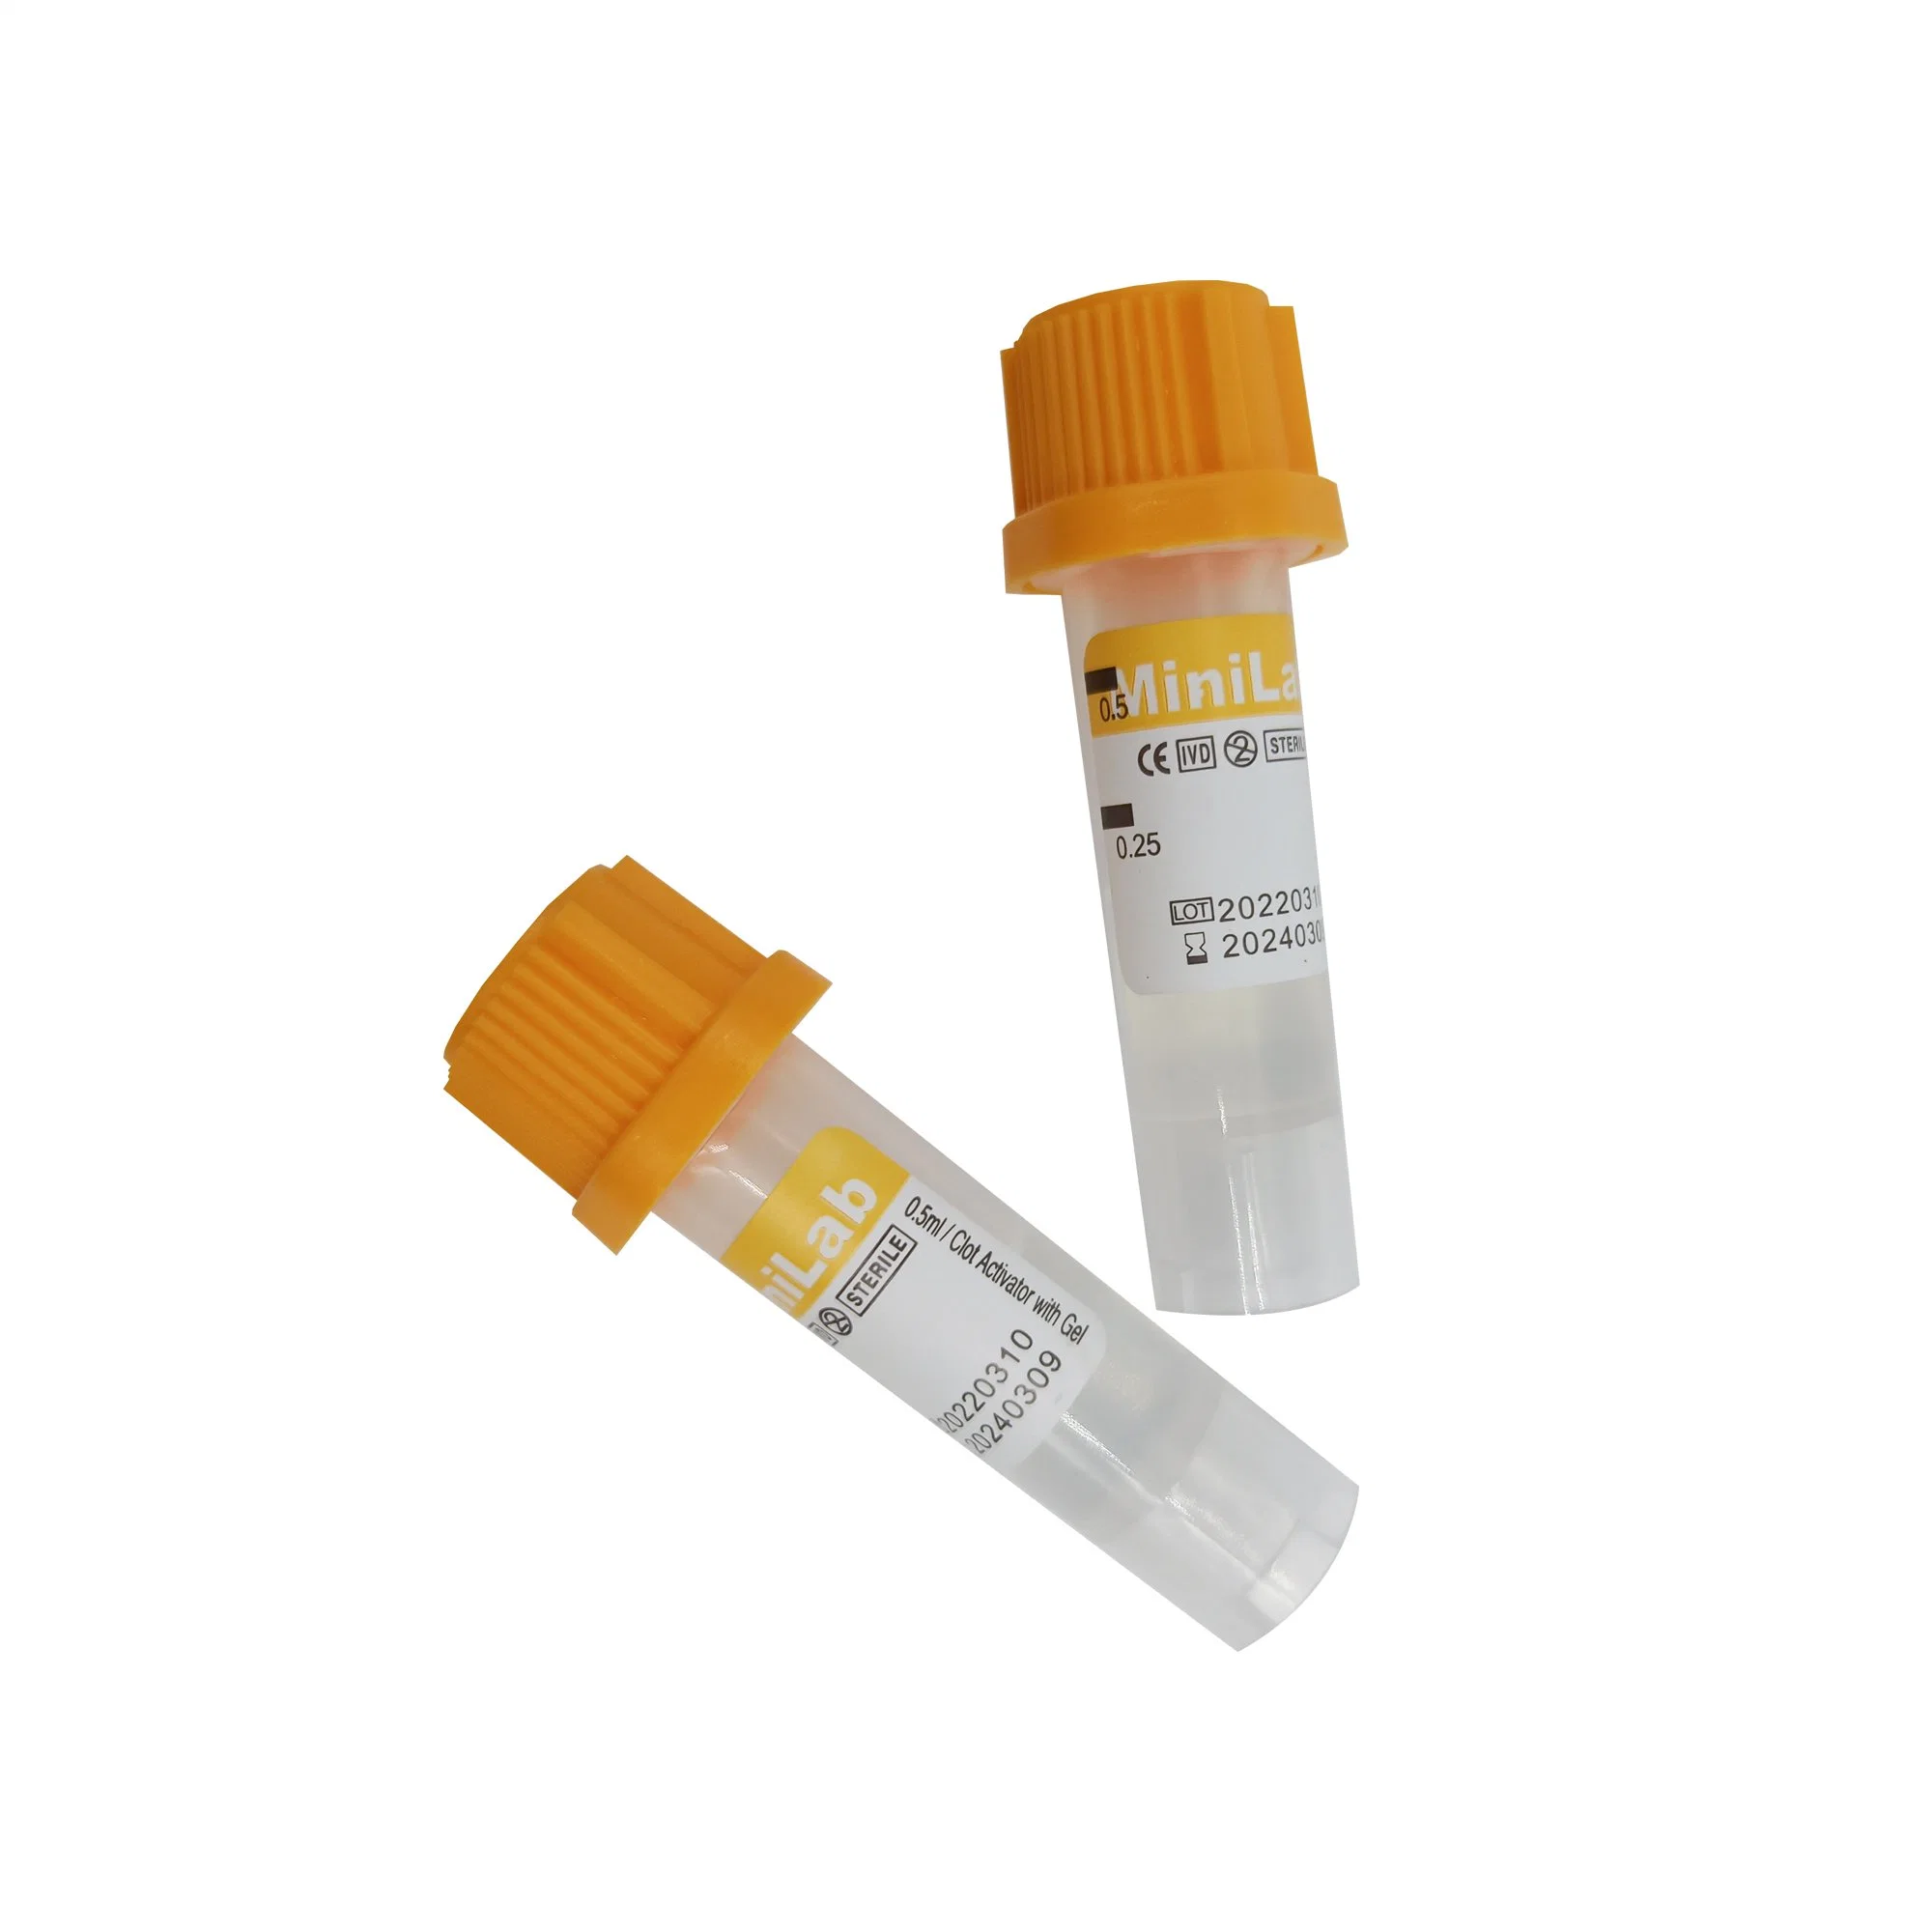 Vacuum Tubes for Blood Collection Disposable Blood Sample Collection Tube